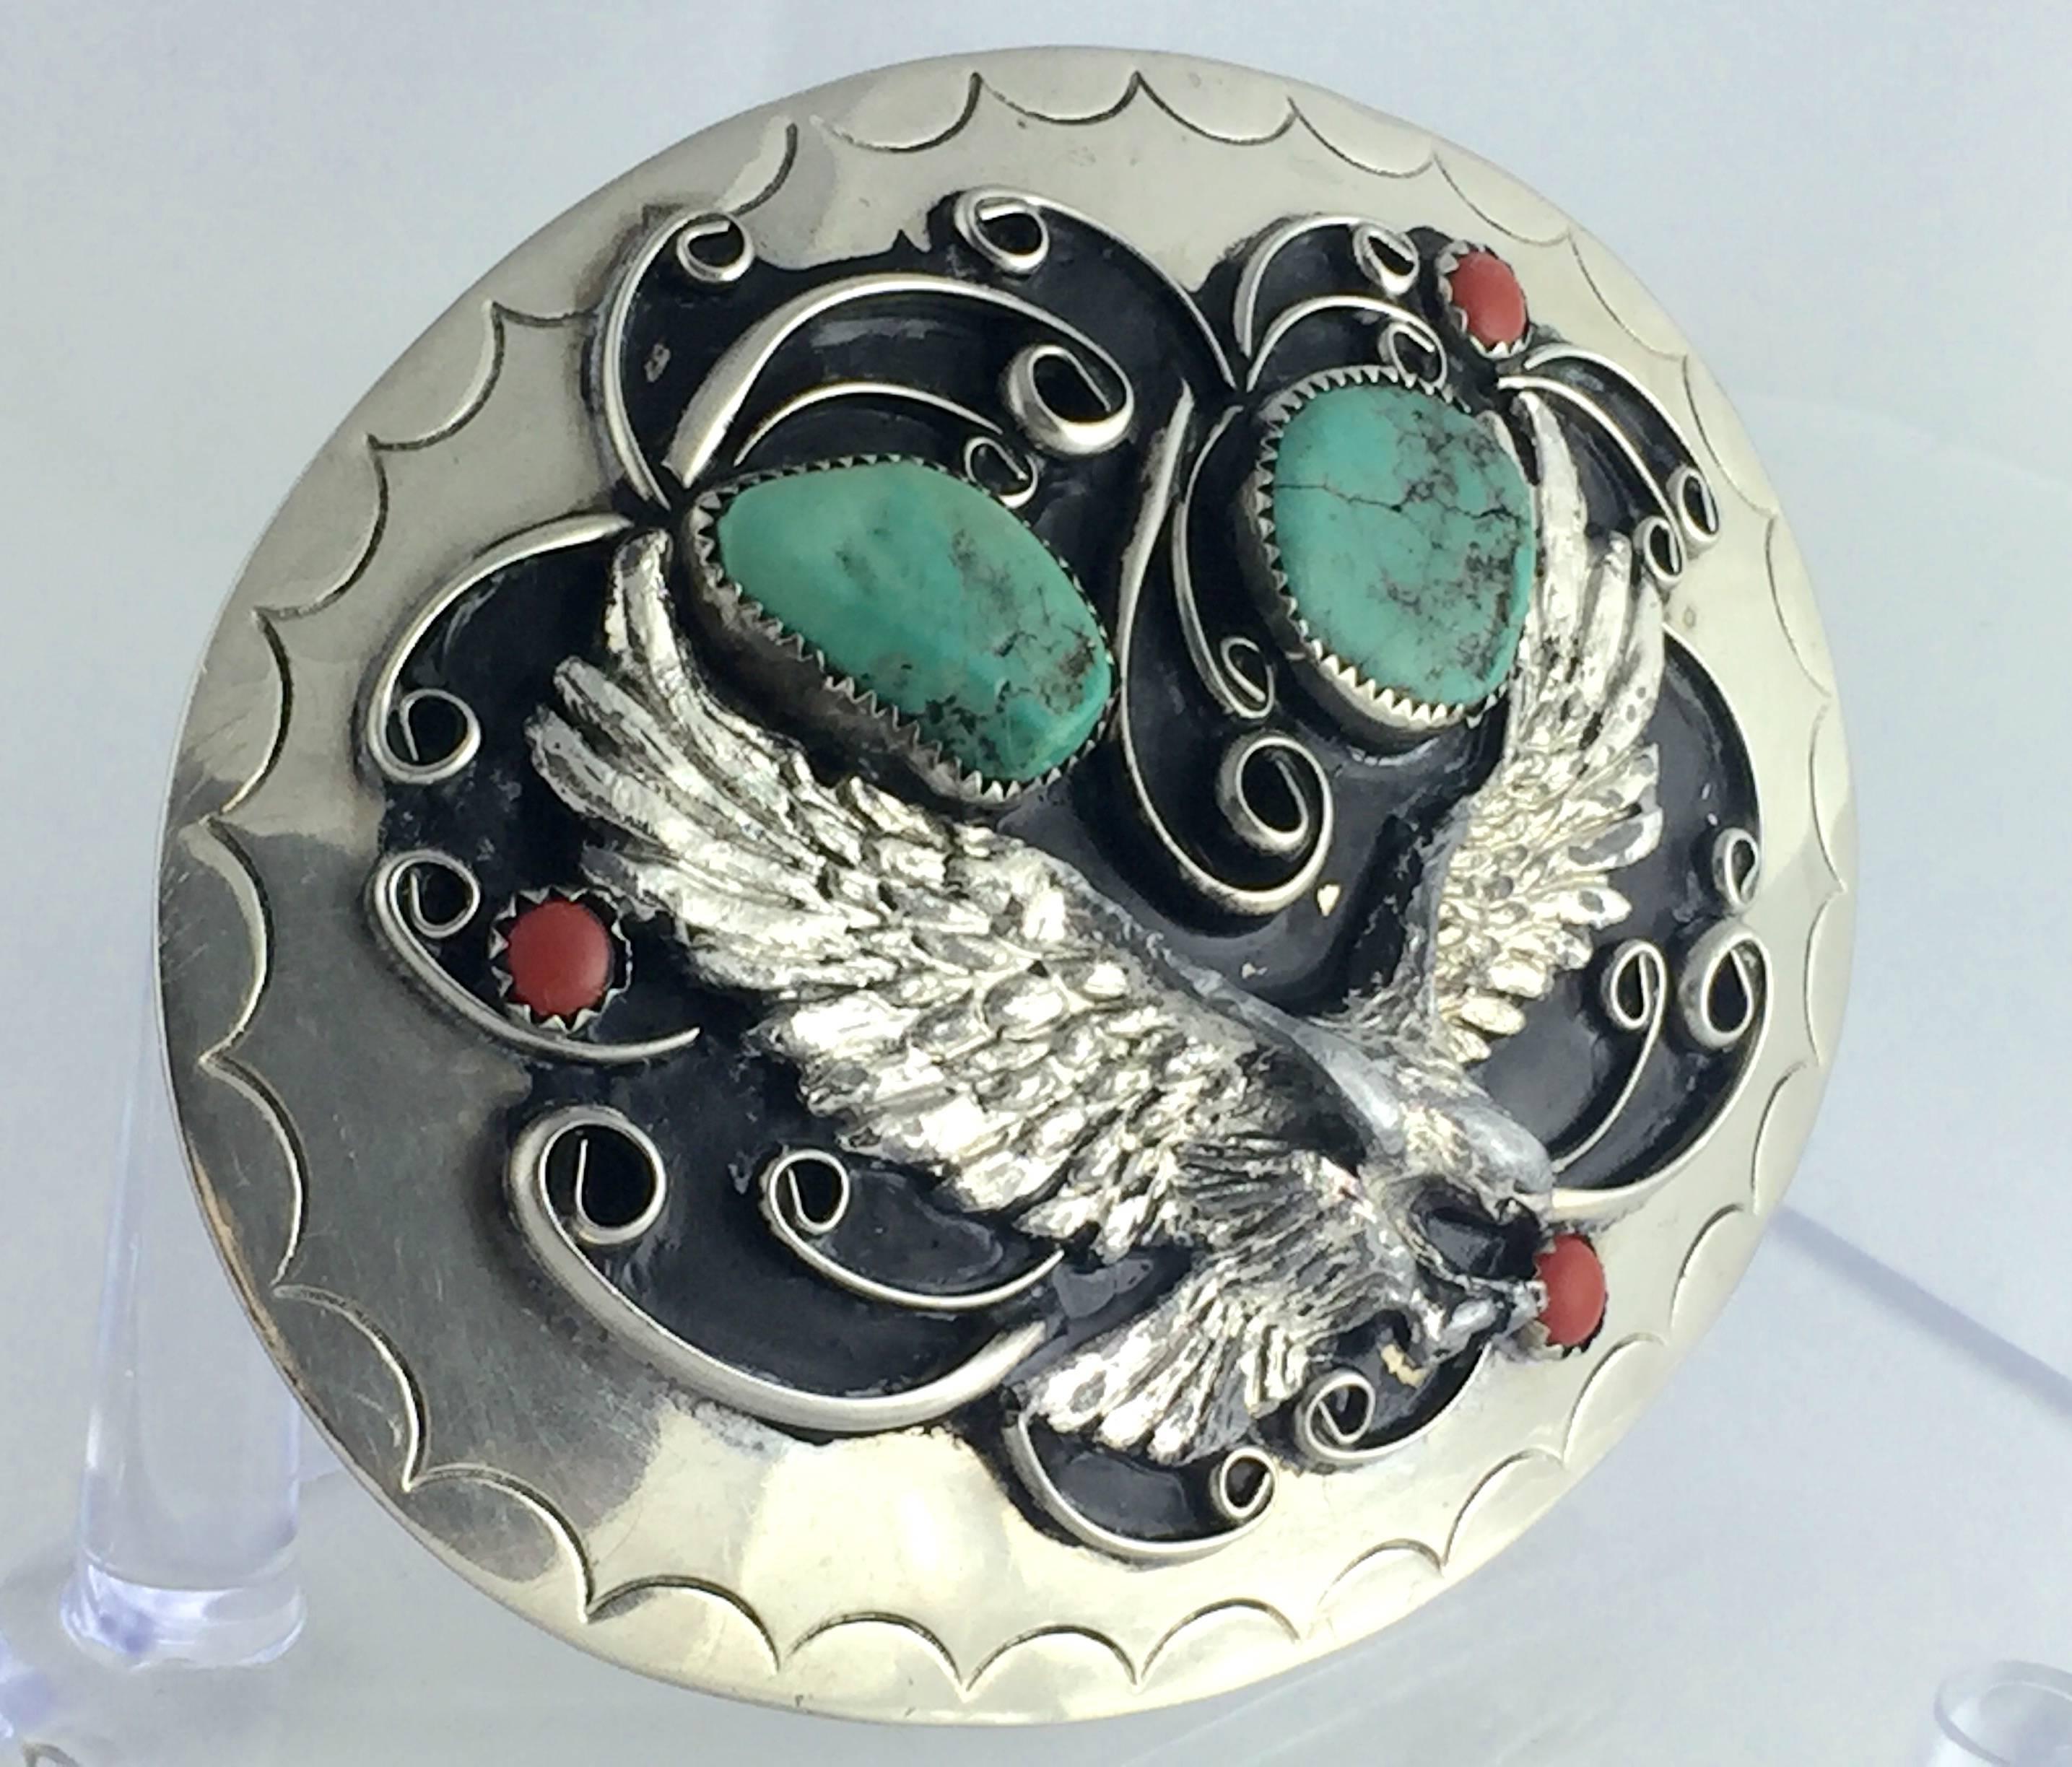  1970'S Squaw Wrap signed "German" silver, turquoise and coral "Thunderbird" flying eagle belt buckle. Features a "Thunderbird" in flight with 3D detail, two large chunky authentic turquoise stone and three genuine red